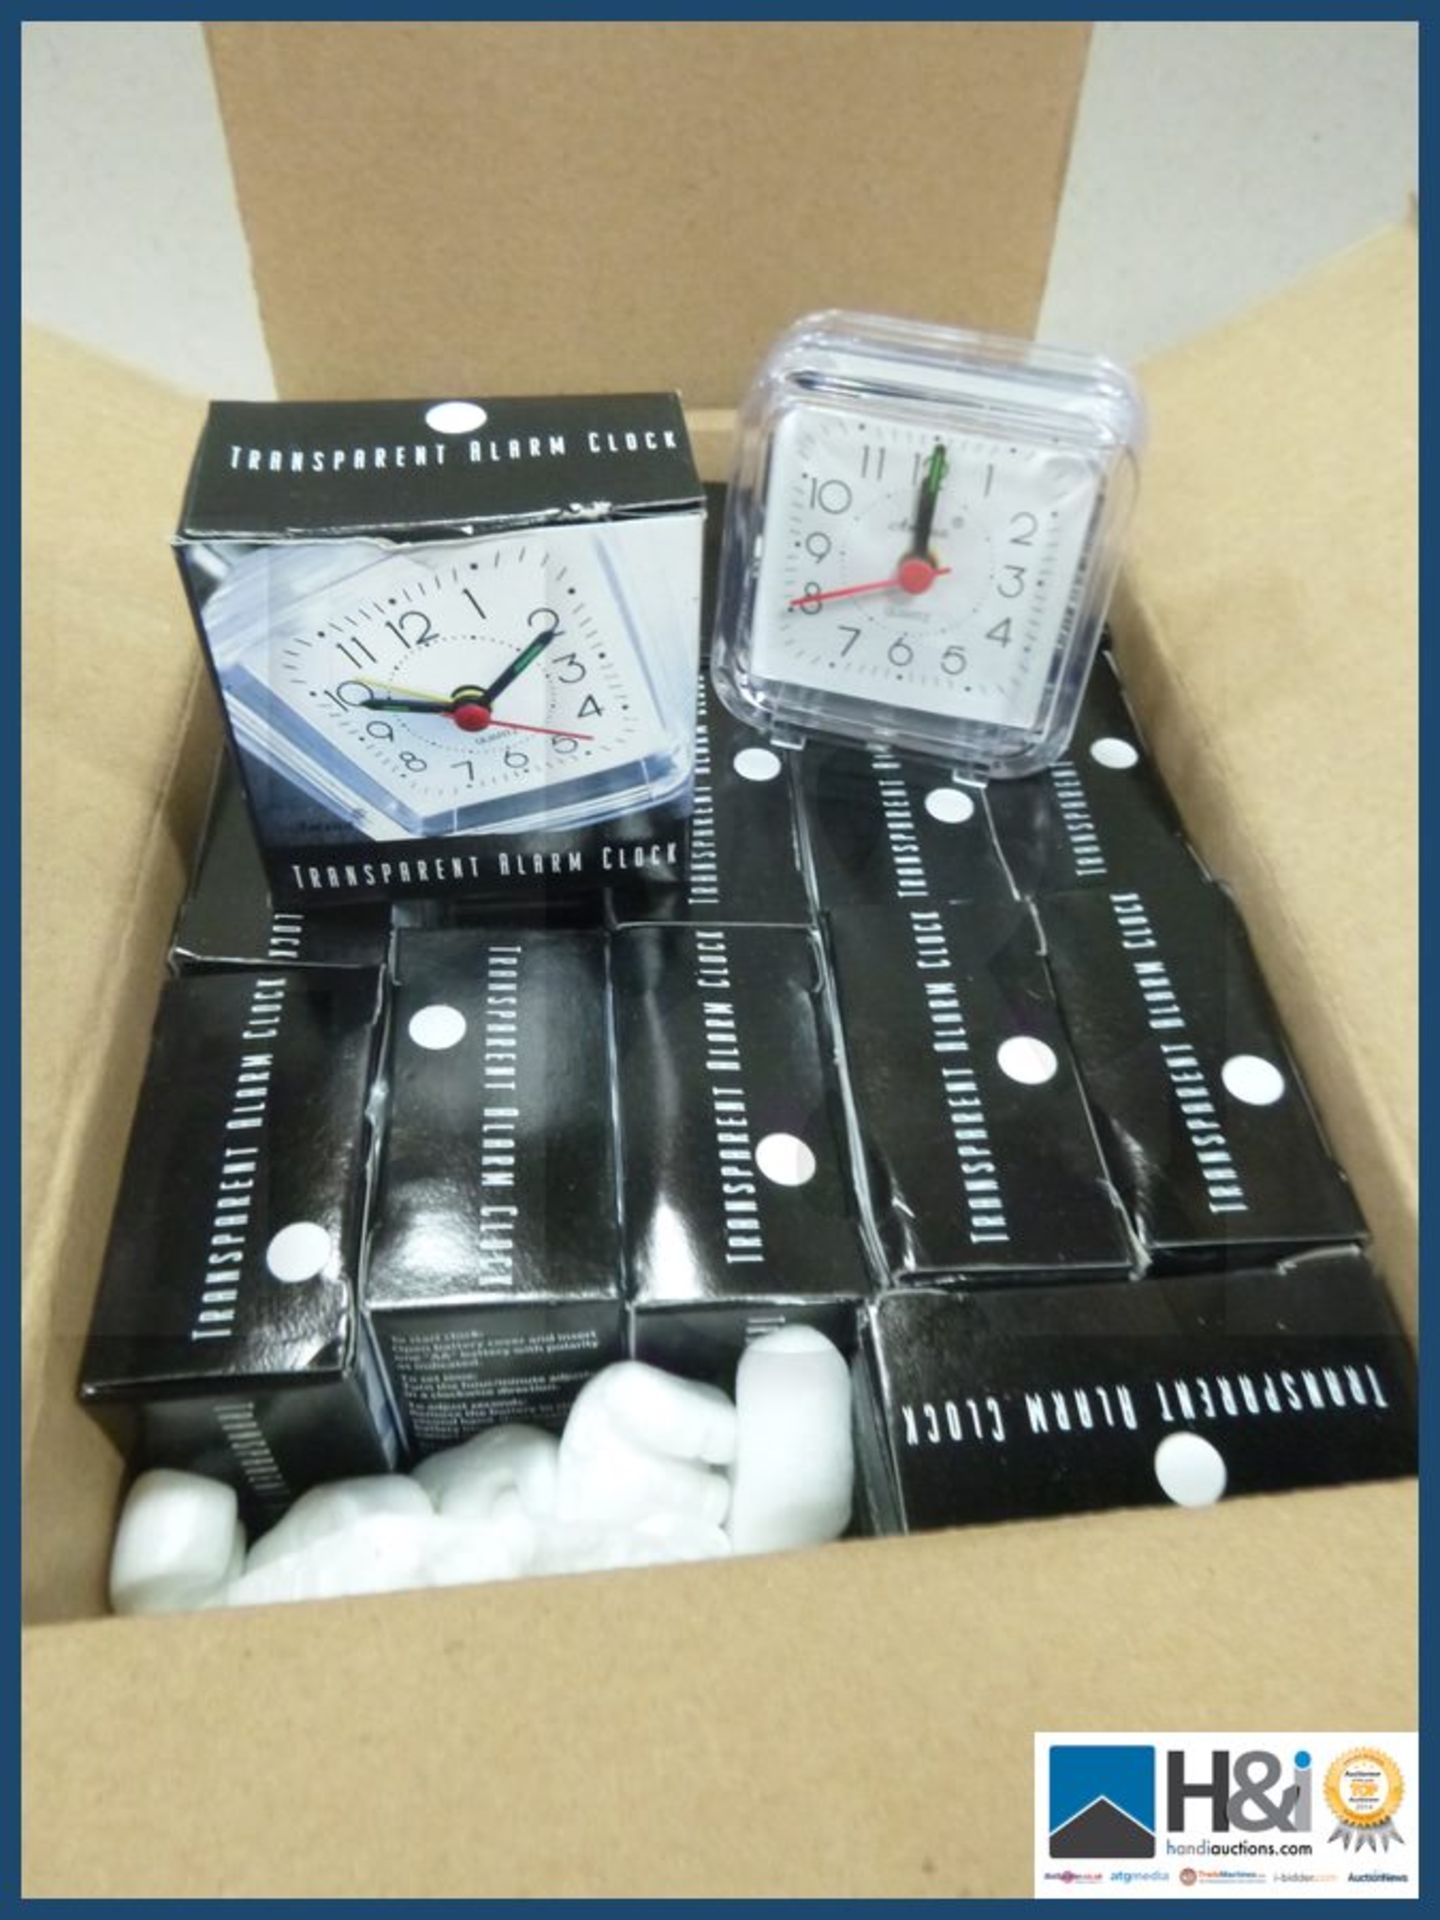 50 Quarts alarm clocks. NO VAT on item except on buyers premium. Shipping and combined shipping avai - Image 2 of 2